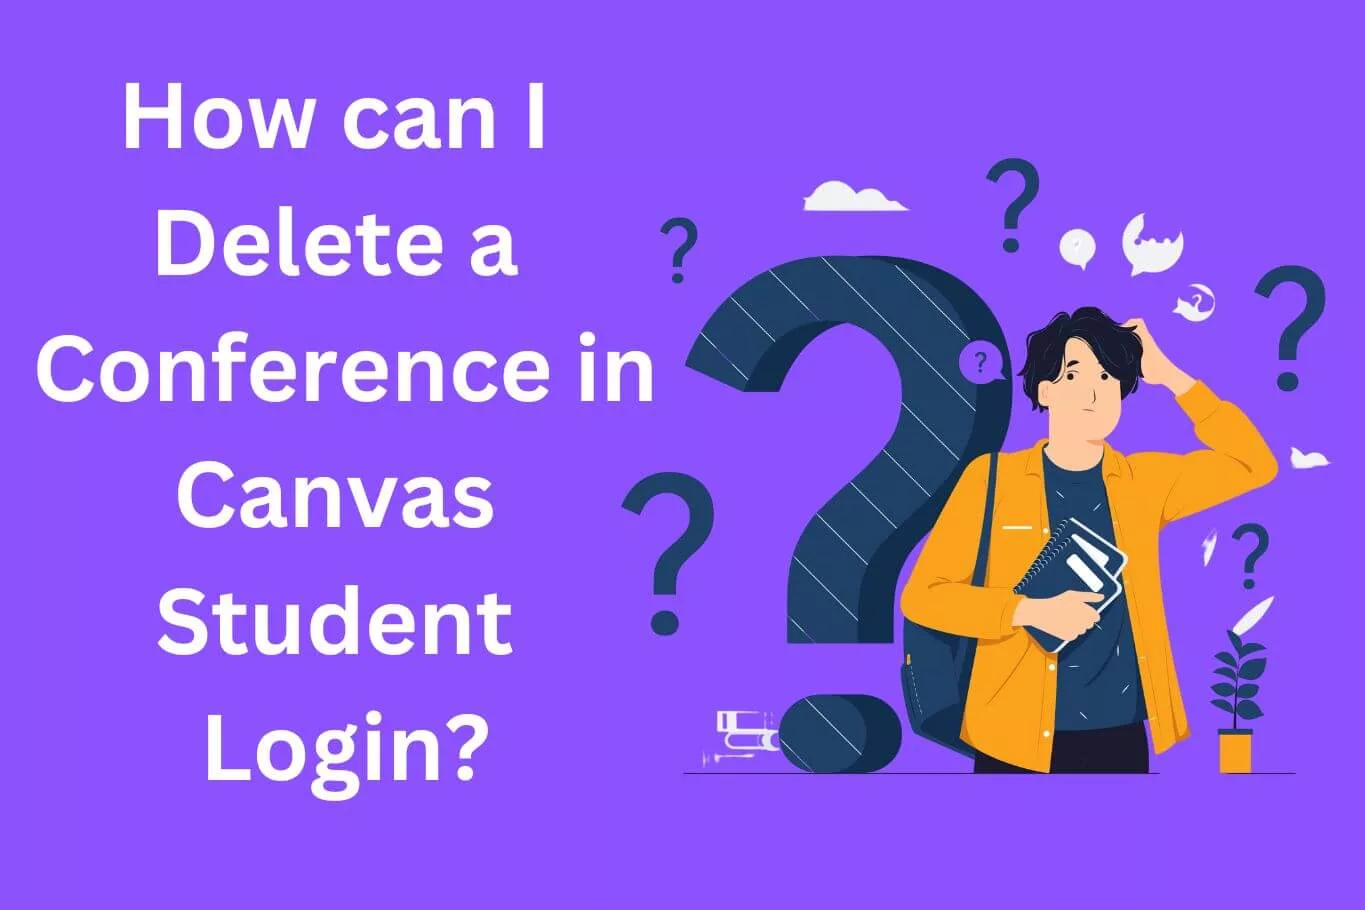 How can I Delete a Conference in Canvas?